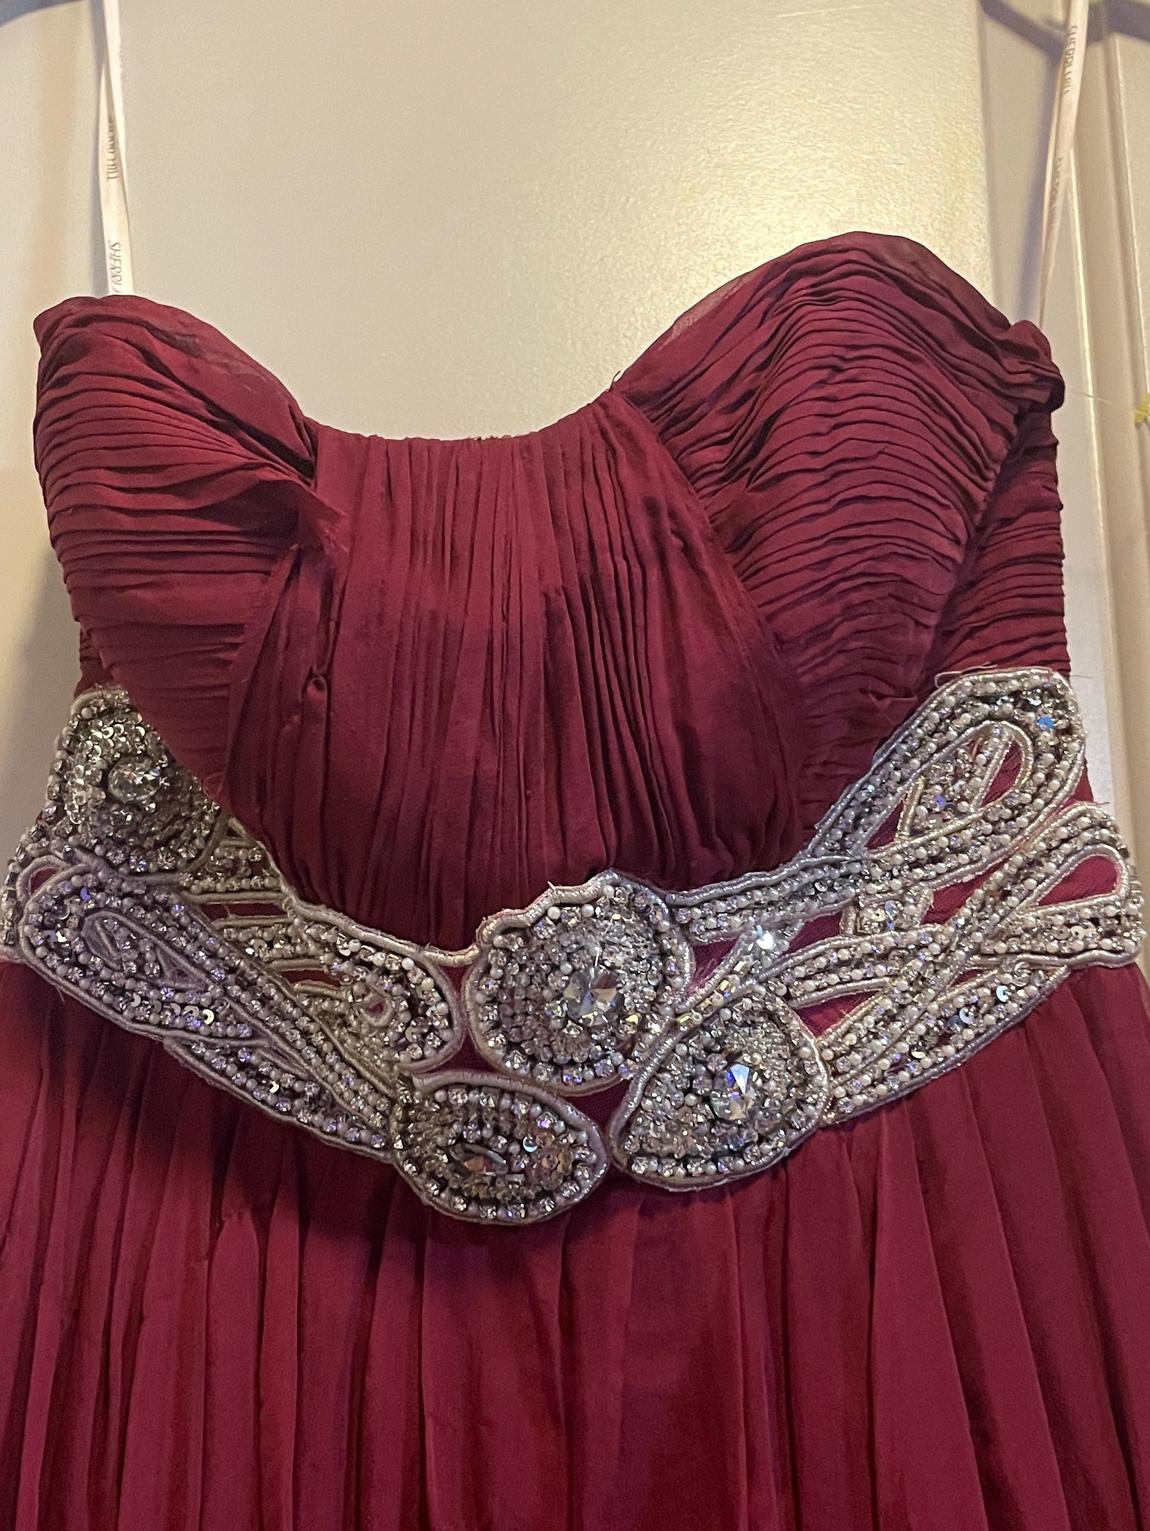 Sherri Hill Size 6 Bridesmaid Strapless Satin Burgundy Red A-line Dress on Queenly